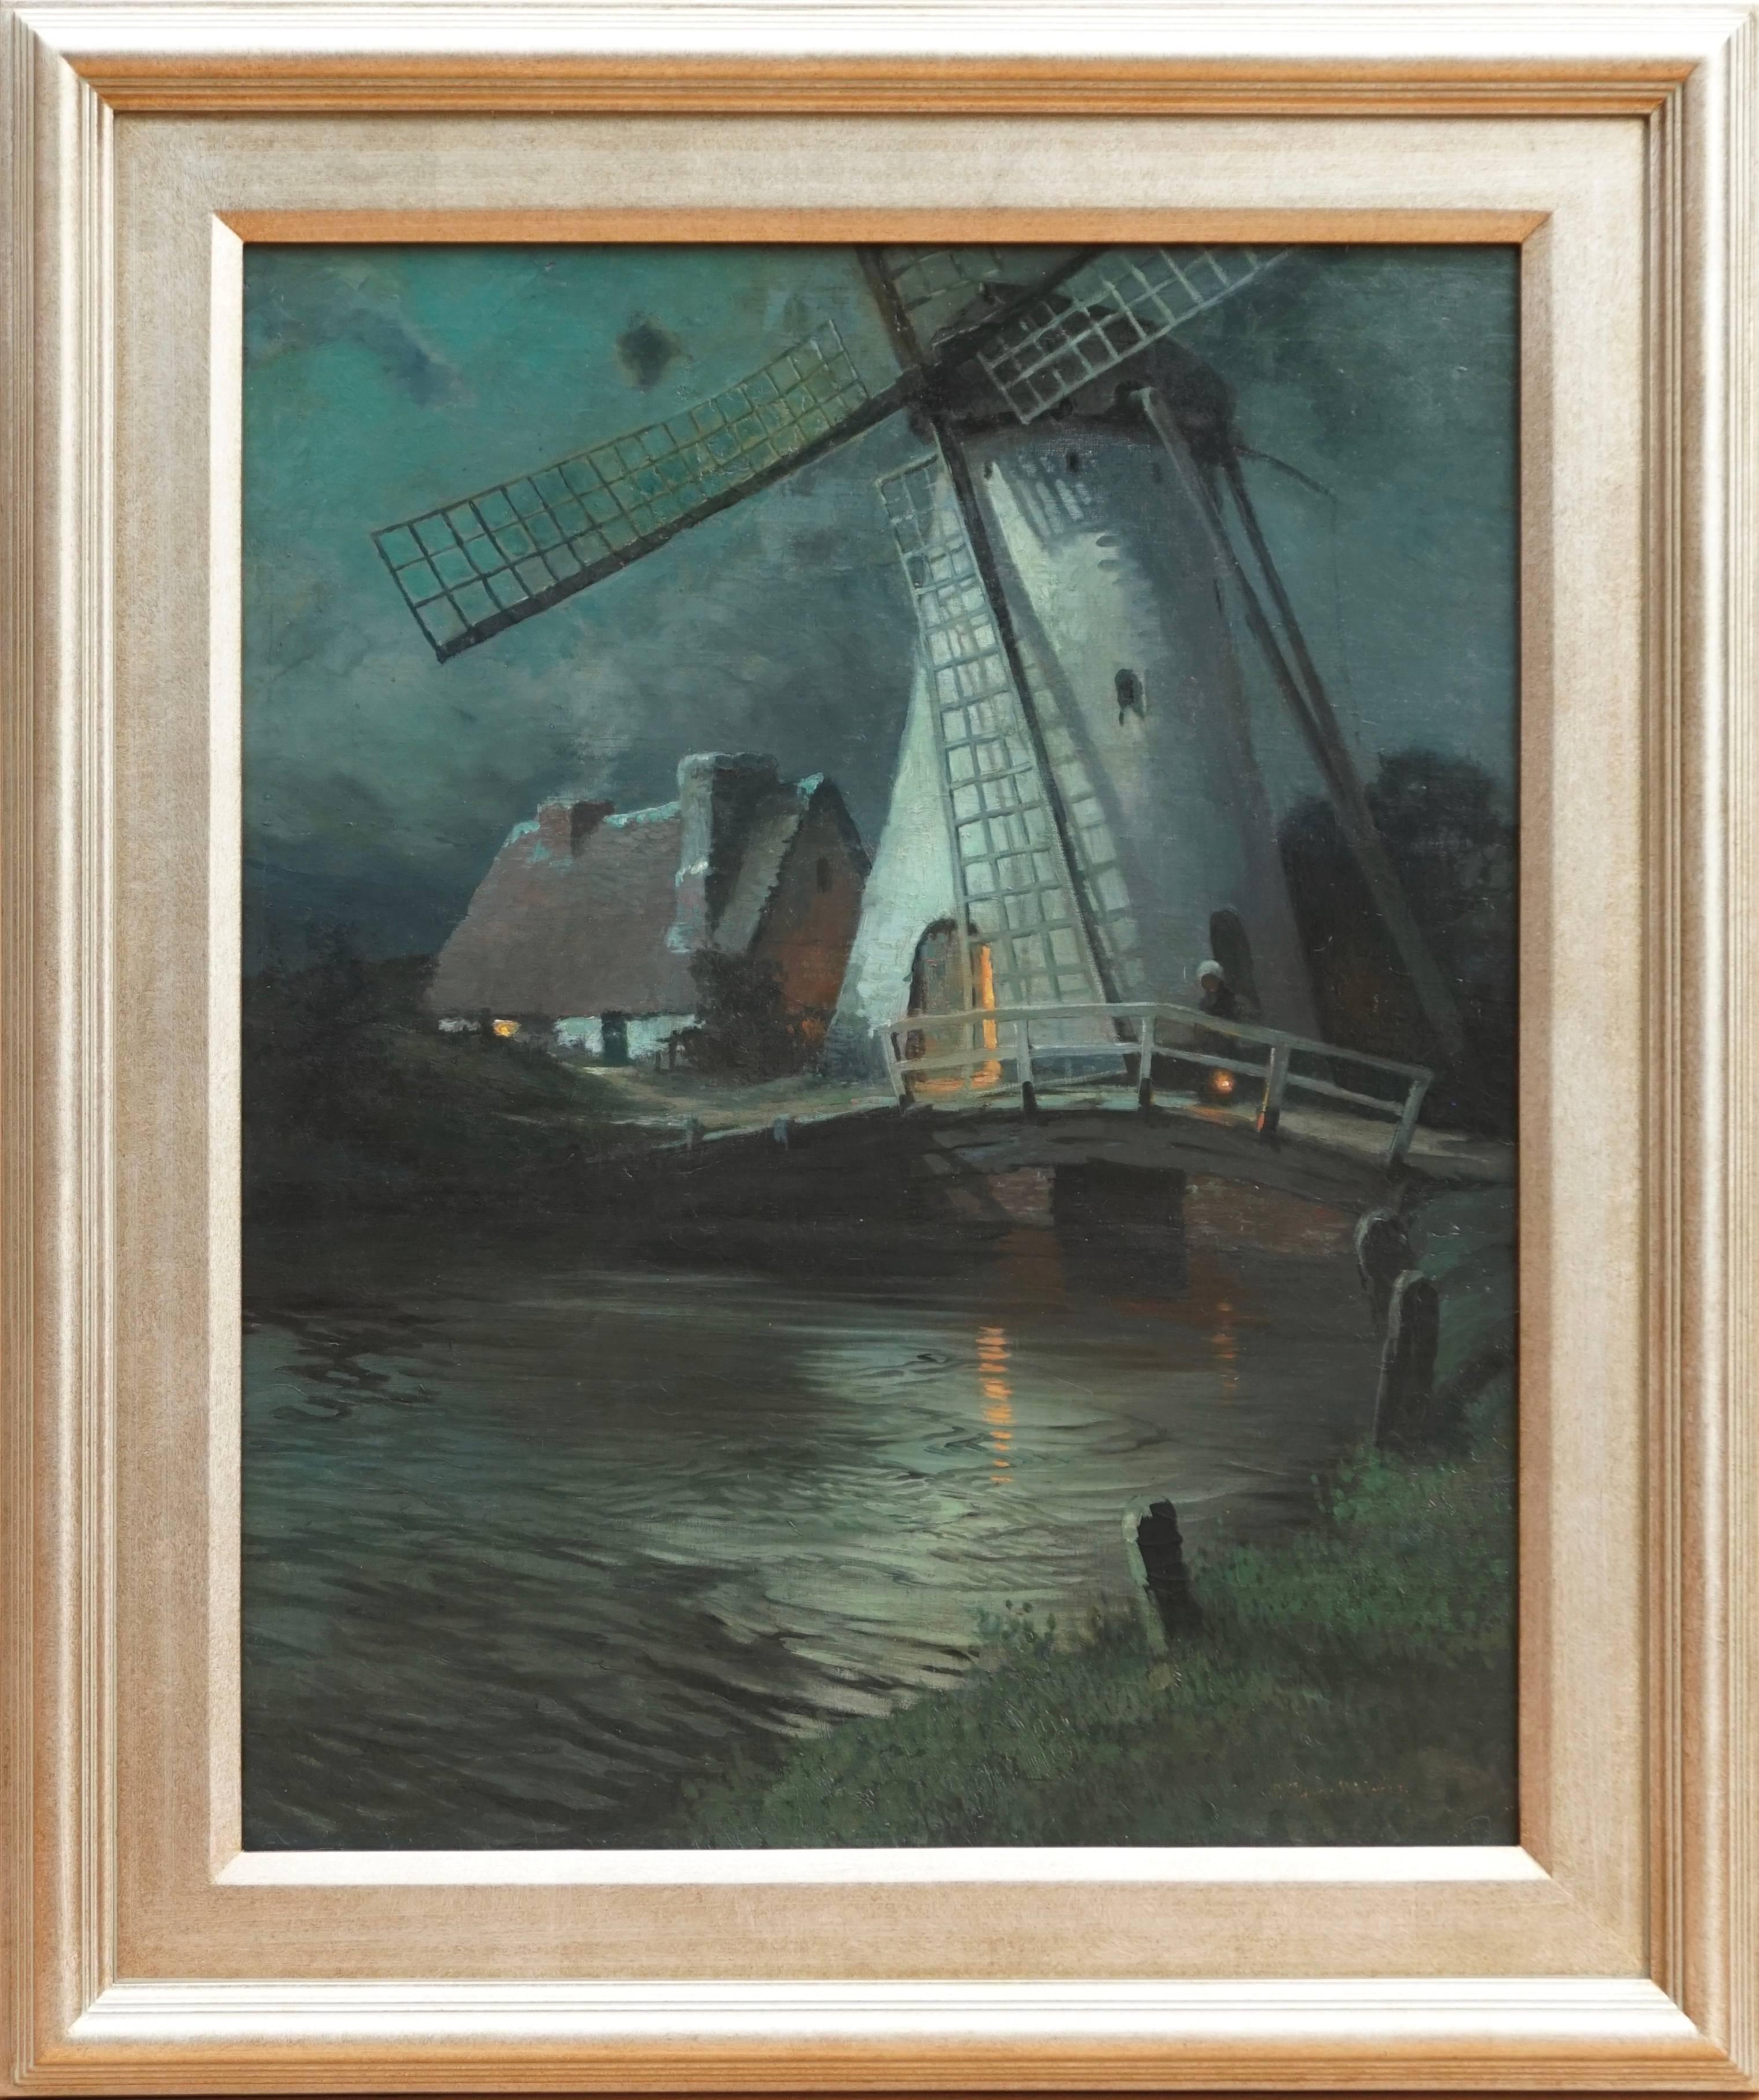 Windmill and a figure in moonligh, Normandy, France 

Signed and dated lower right: G. Ames Aldrich / 1908 

Measure: Canvas: 24